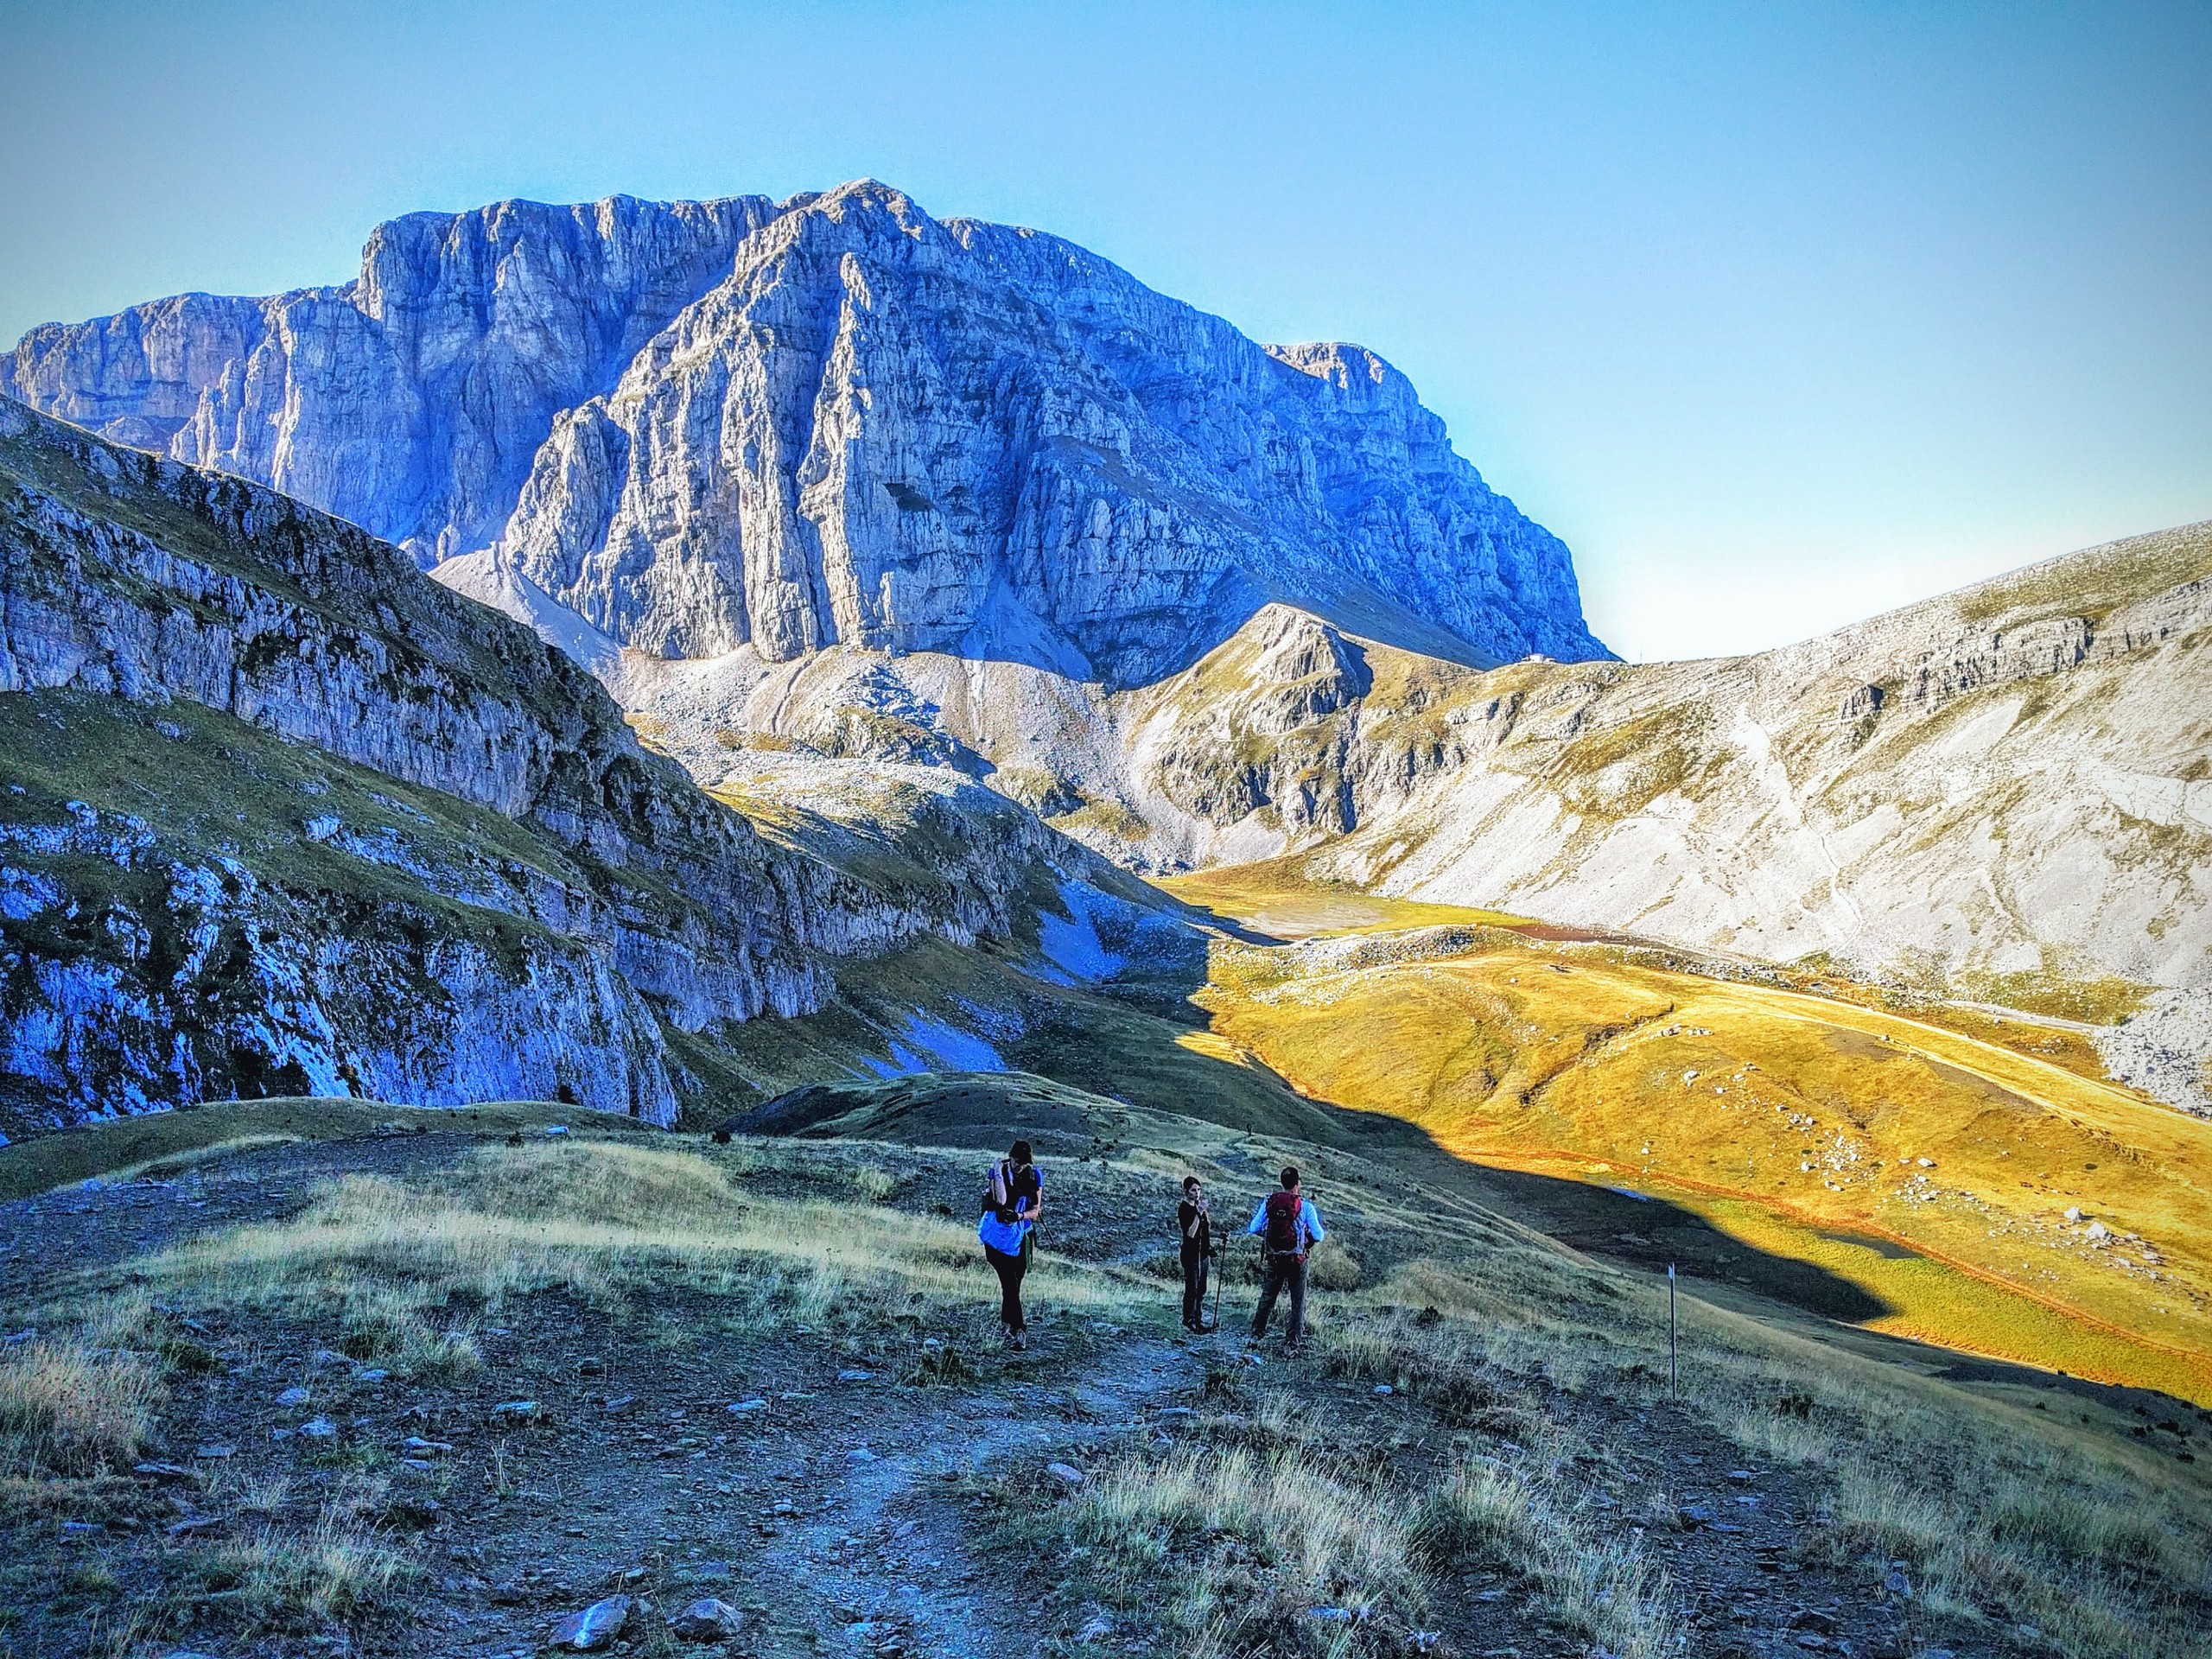 Group of hikers exploring the Zagori Mountains in Greece